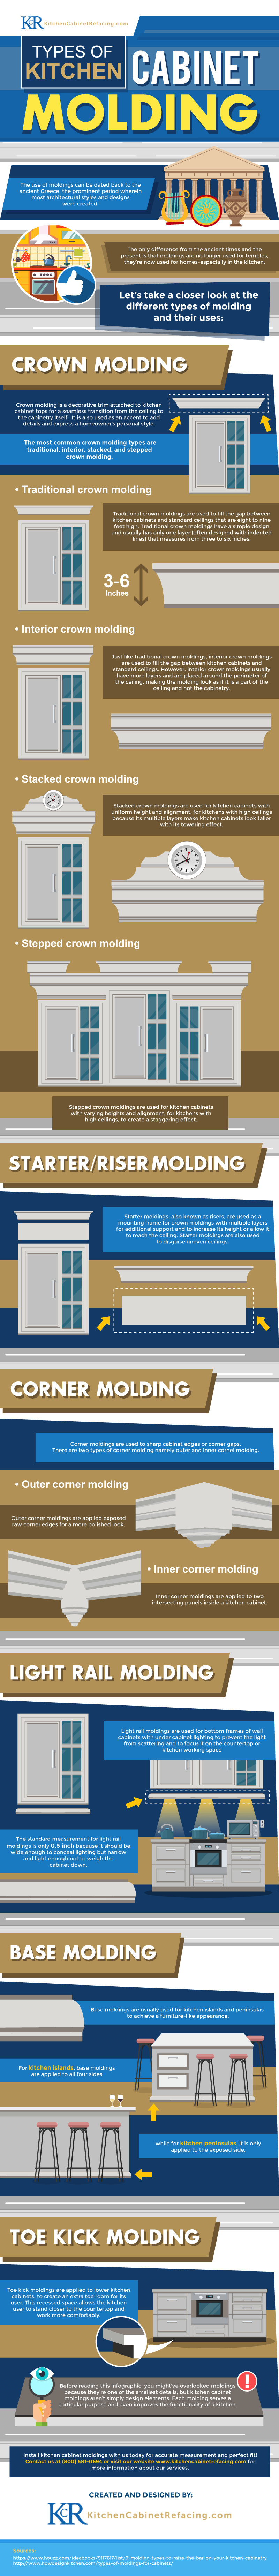 Types of kitchen cabinet molding